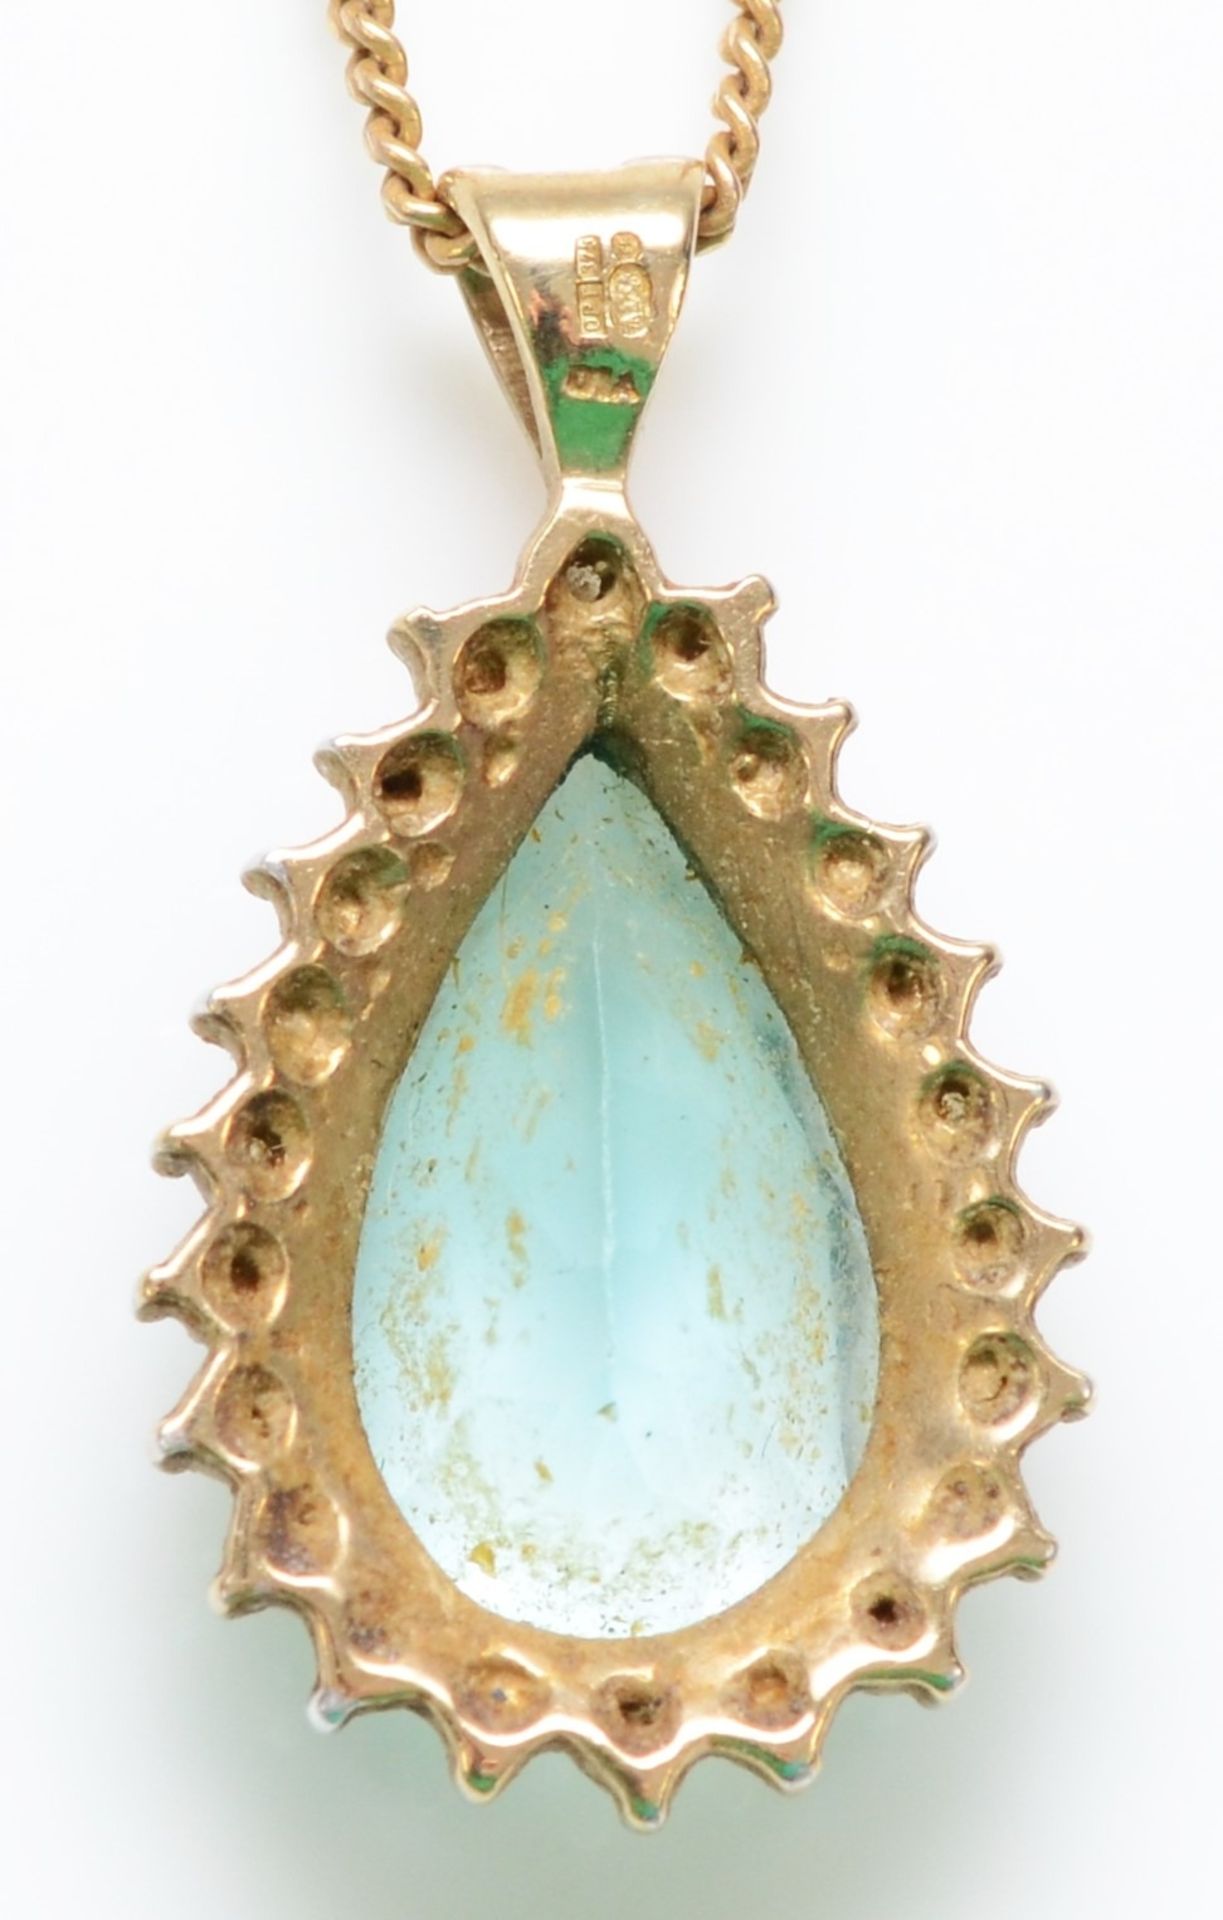 A 9ct gold pear shape topaz and diamond set pendant, 22mm, chain, 4.5gm - Image 2 of 2